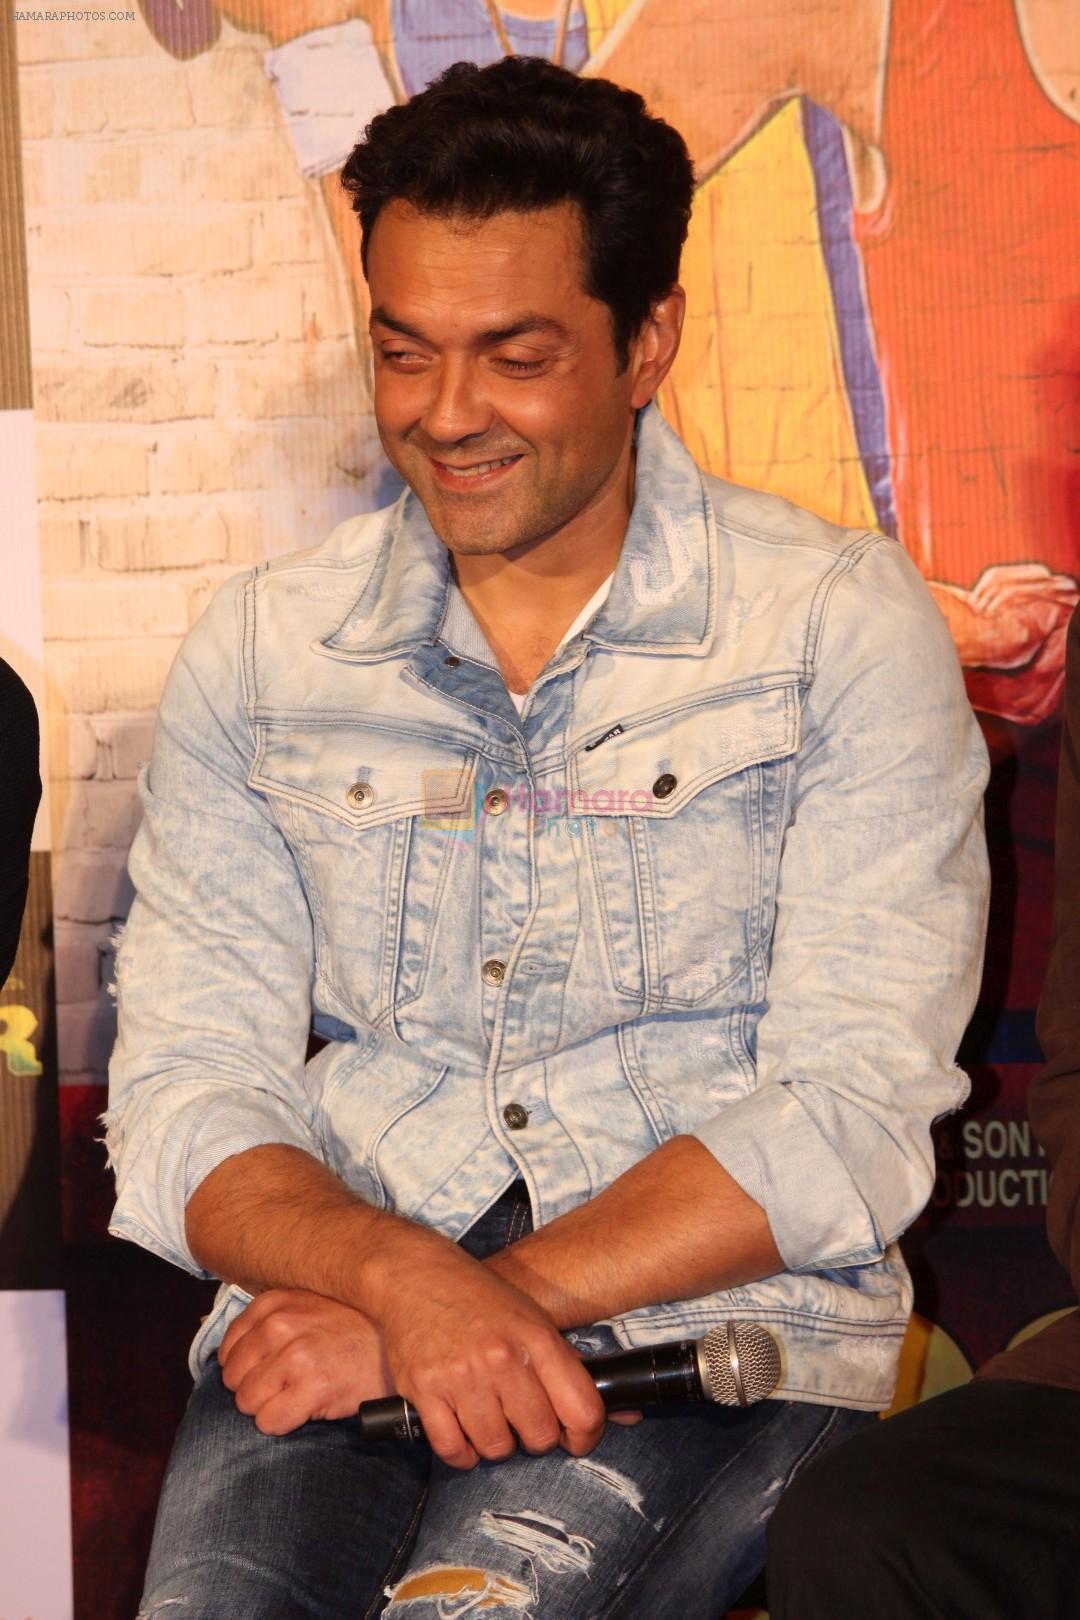 Bobby Deol at the Trailer Launch Of Film Poster Boys on 24th July 2017